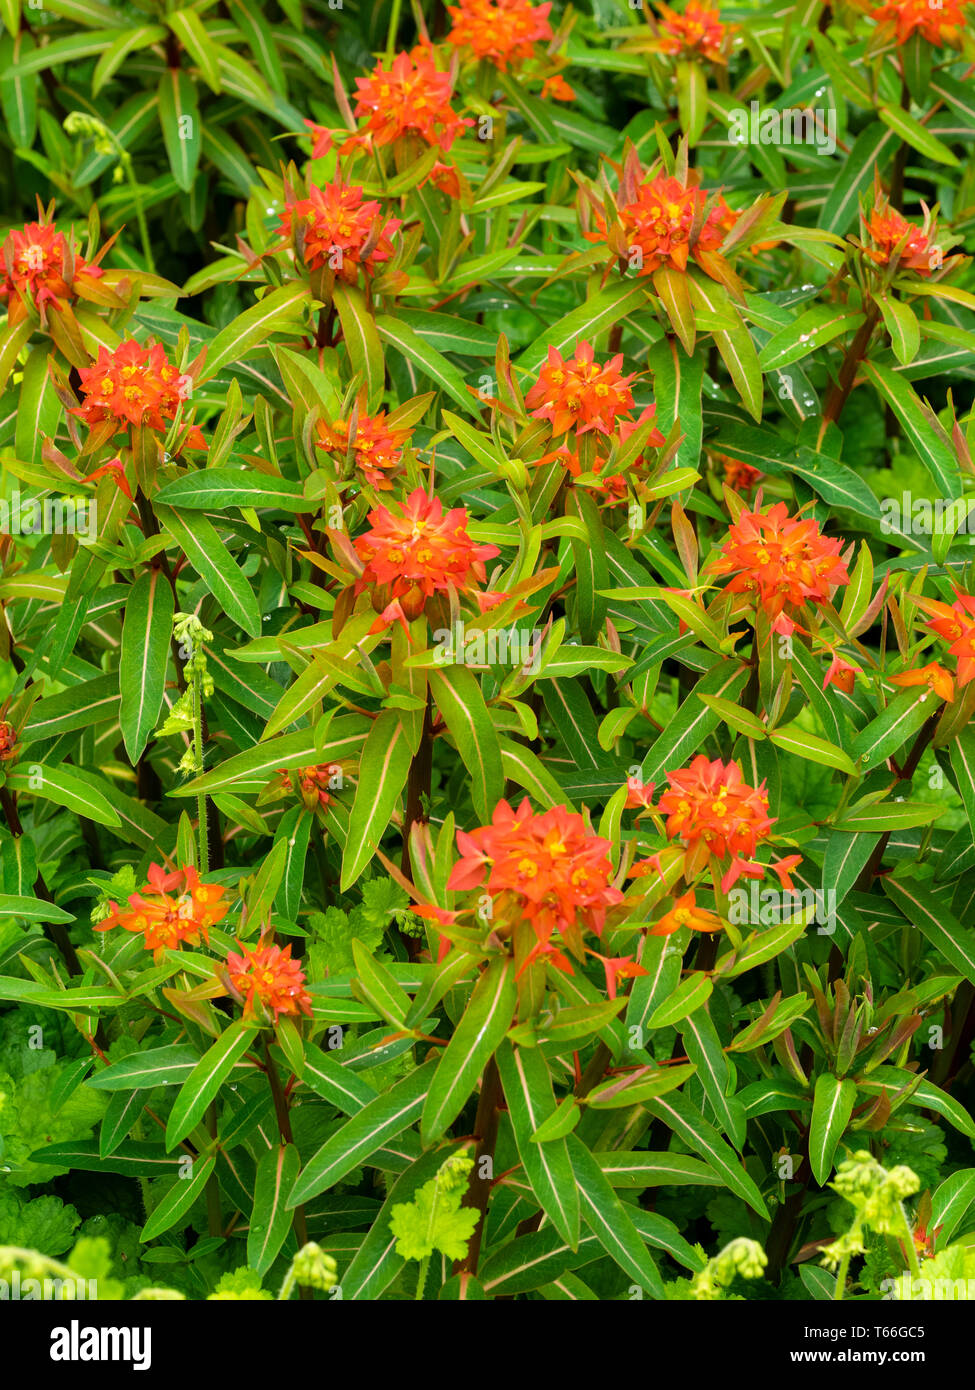 Red bracts encase the small yellow flowers of the upright, spring flowering spurge, Euphorbia griffithii 'Fireglow' Stock Photo